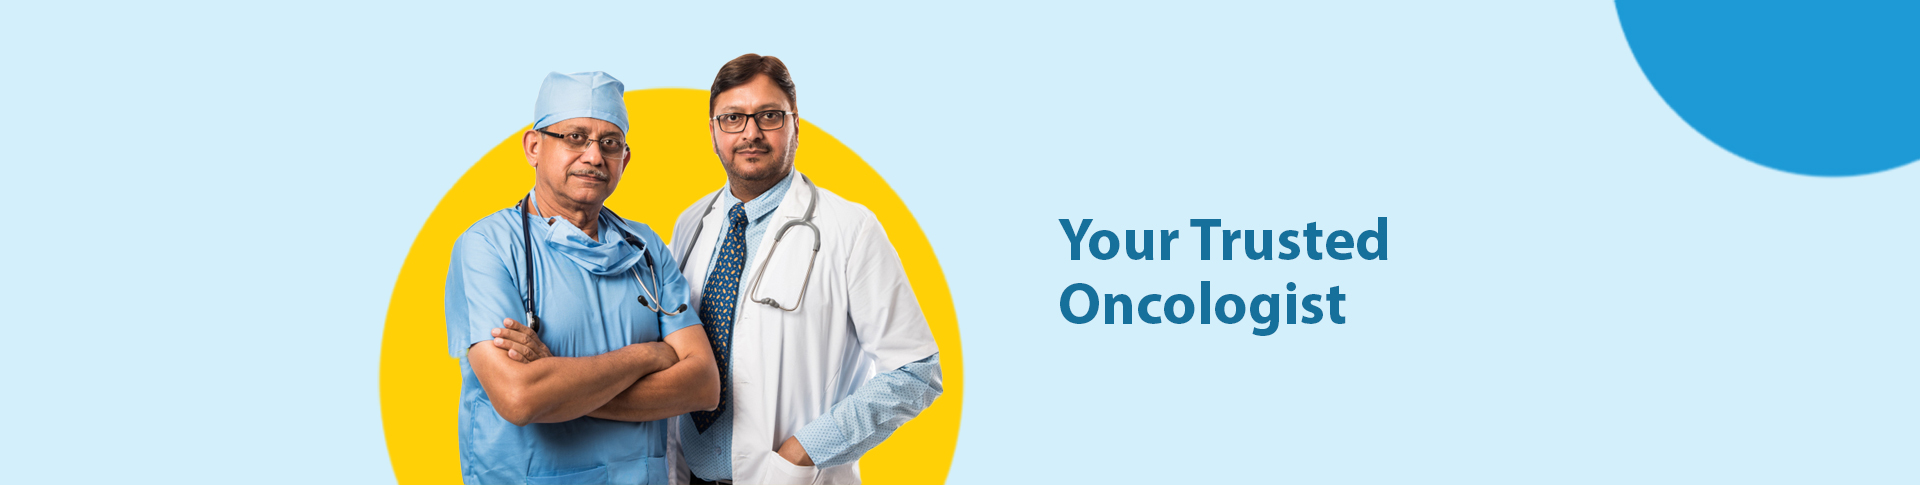 find oncology doctor banner child page